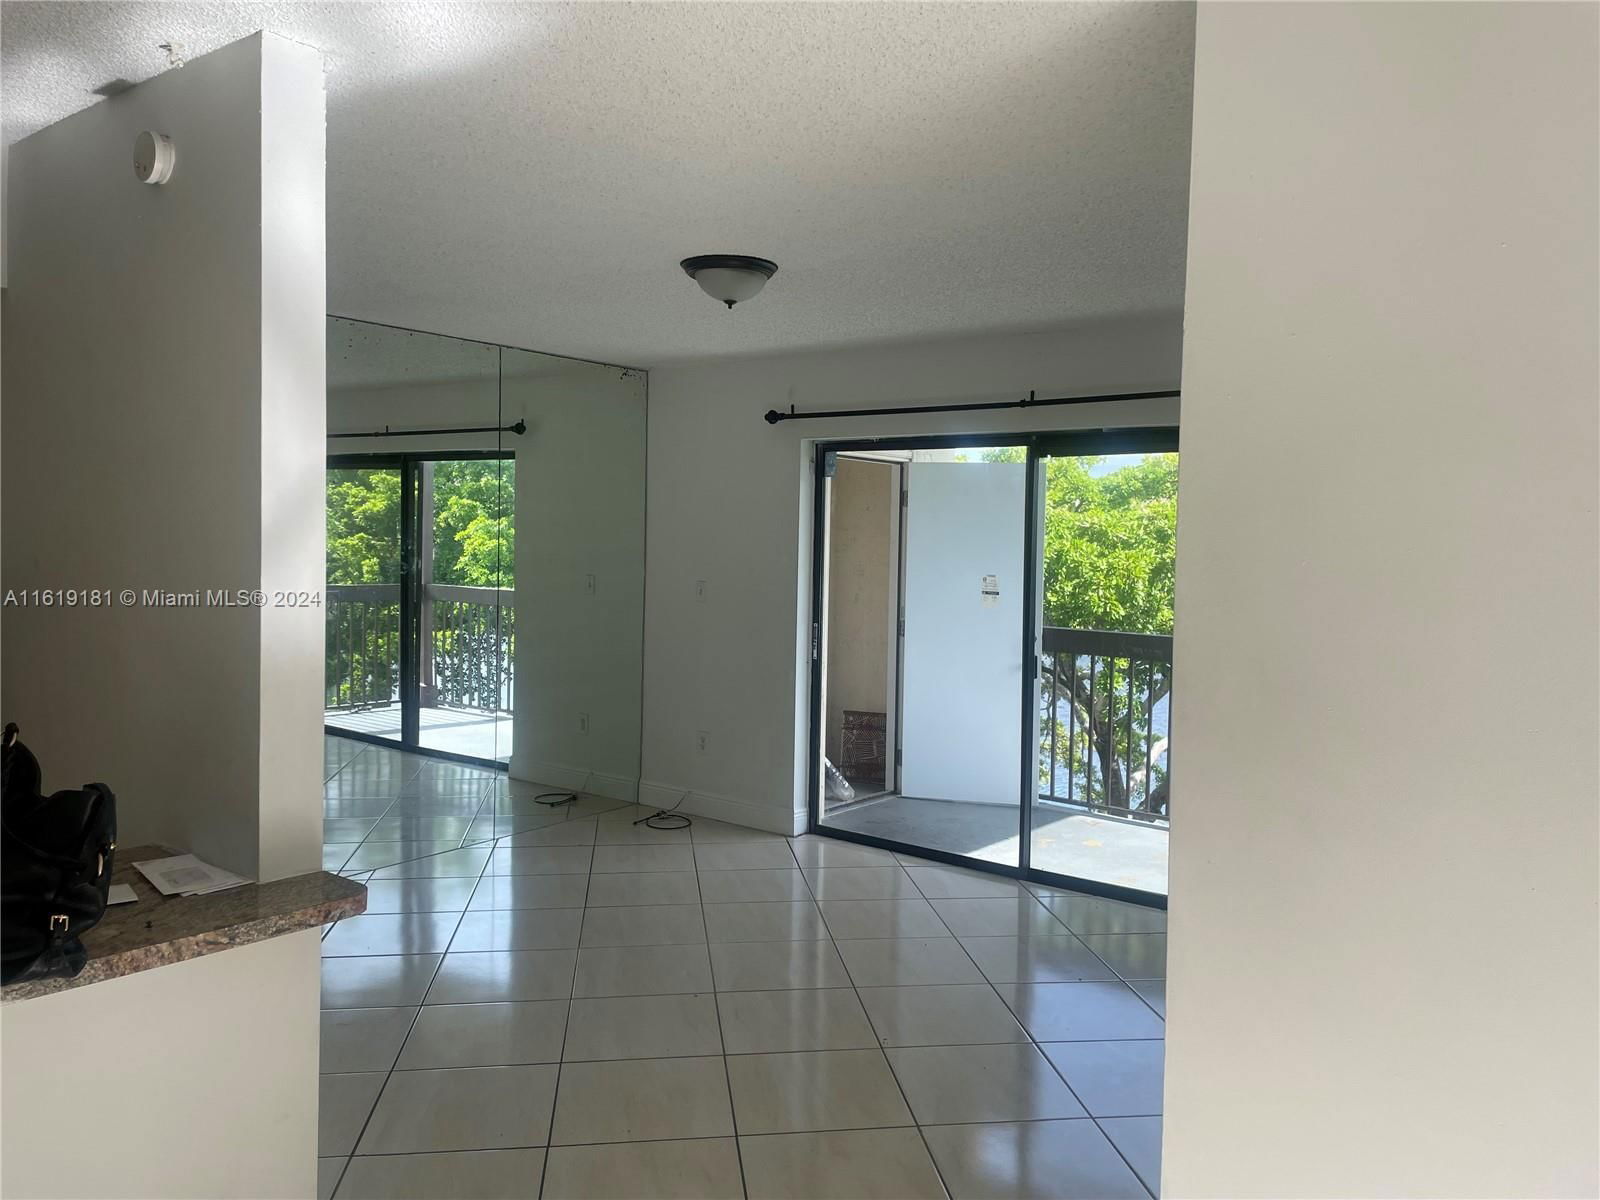 Real estate property located at 475 210th St #205, Miami-Dade County, MCARTHUR PARK MISTY LK CO, Miami Gardens, FL